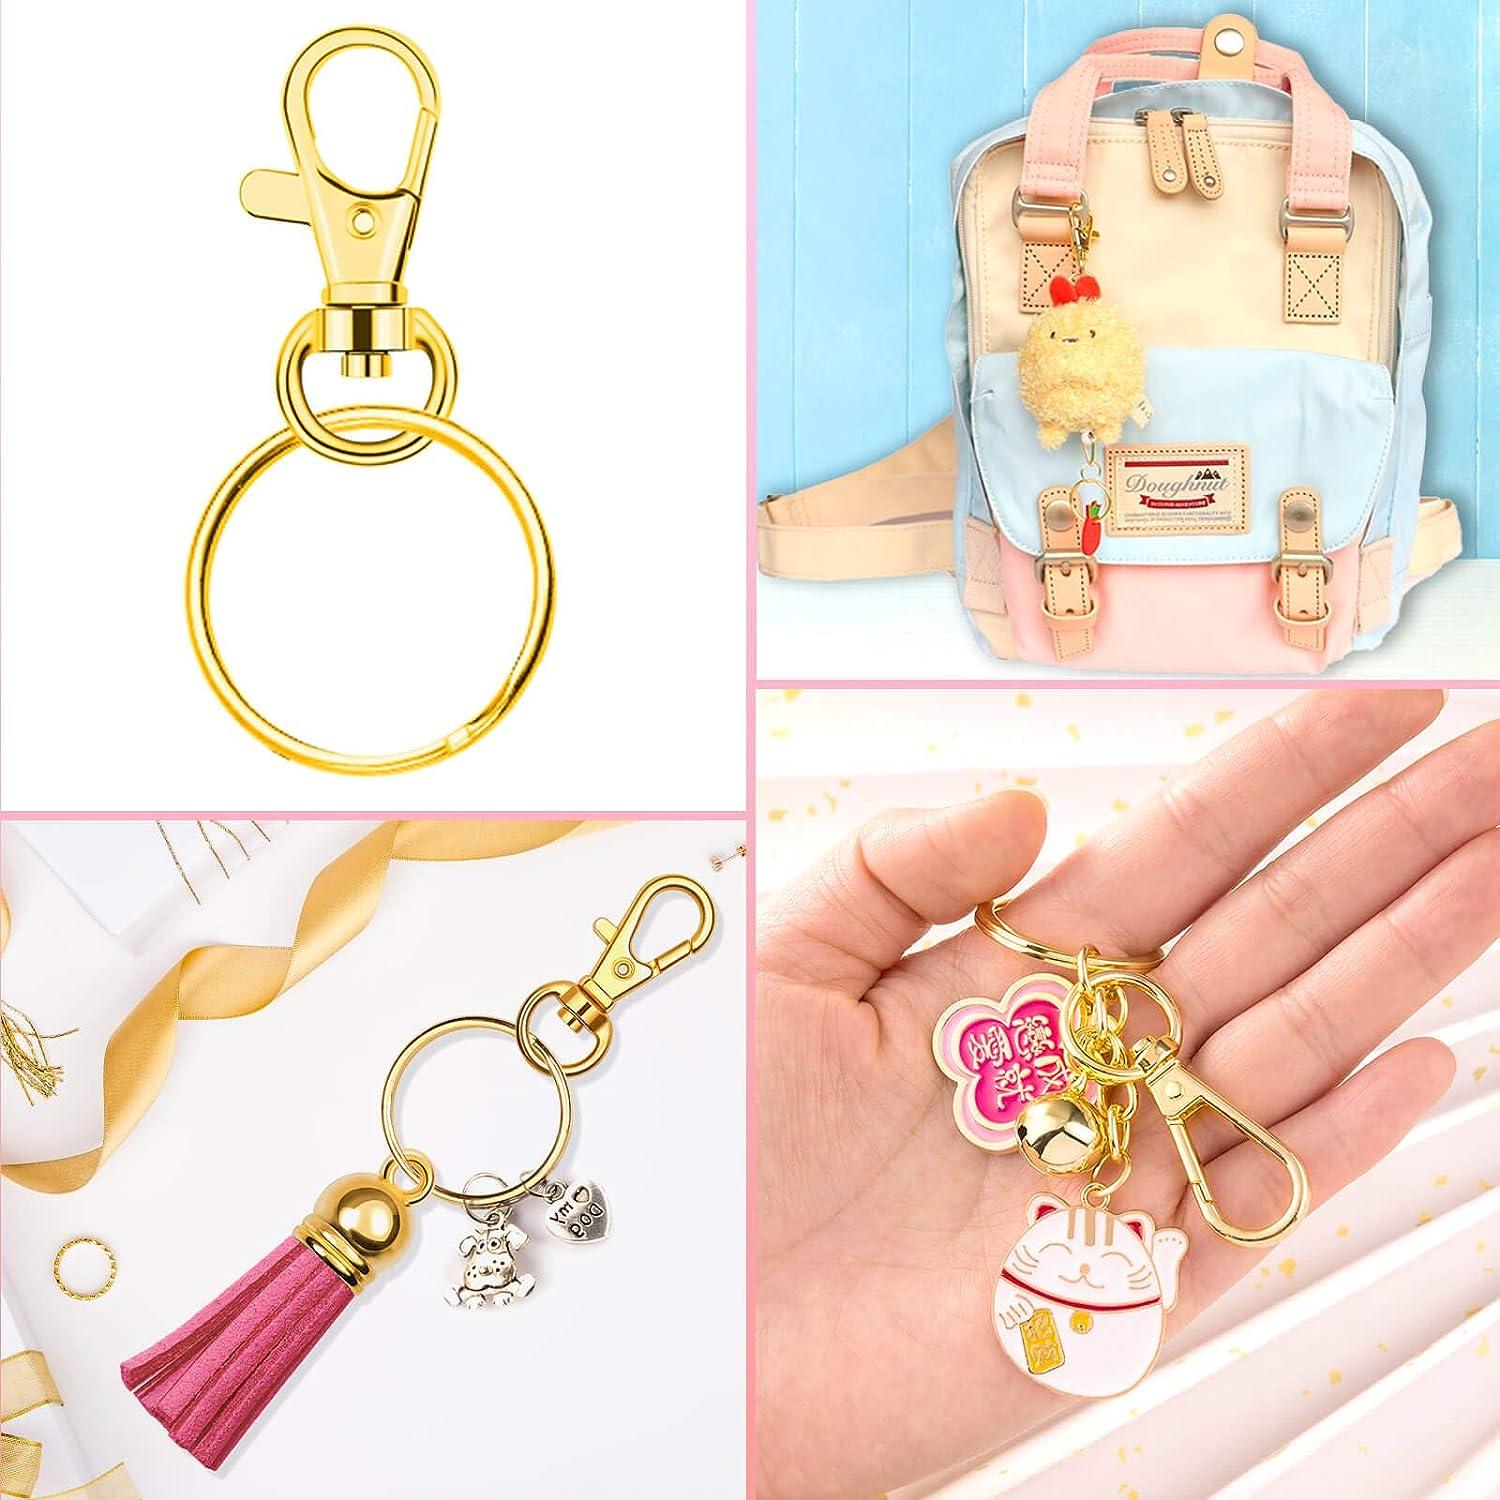 Gold Keychain Rings for Craft Paxcoo 100pcs Keychain Hardware Kit